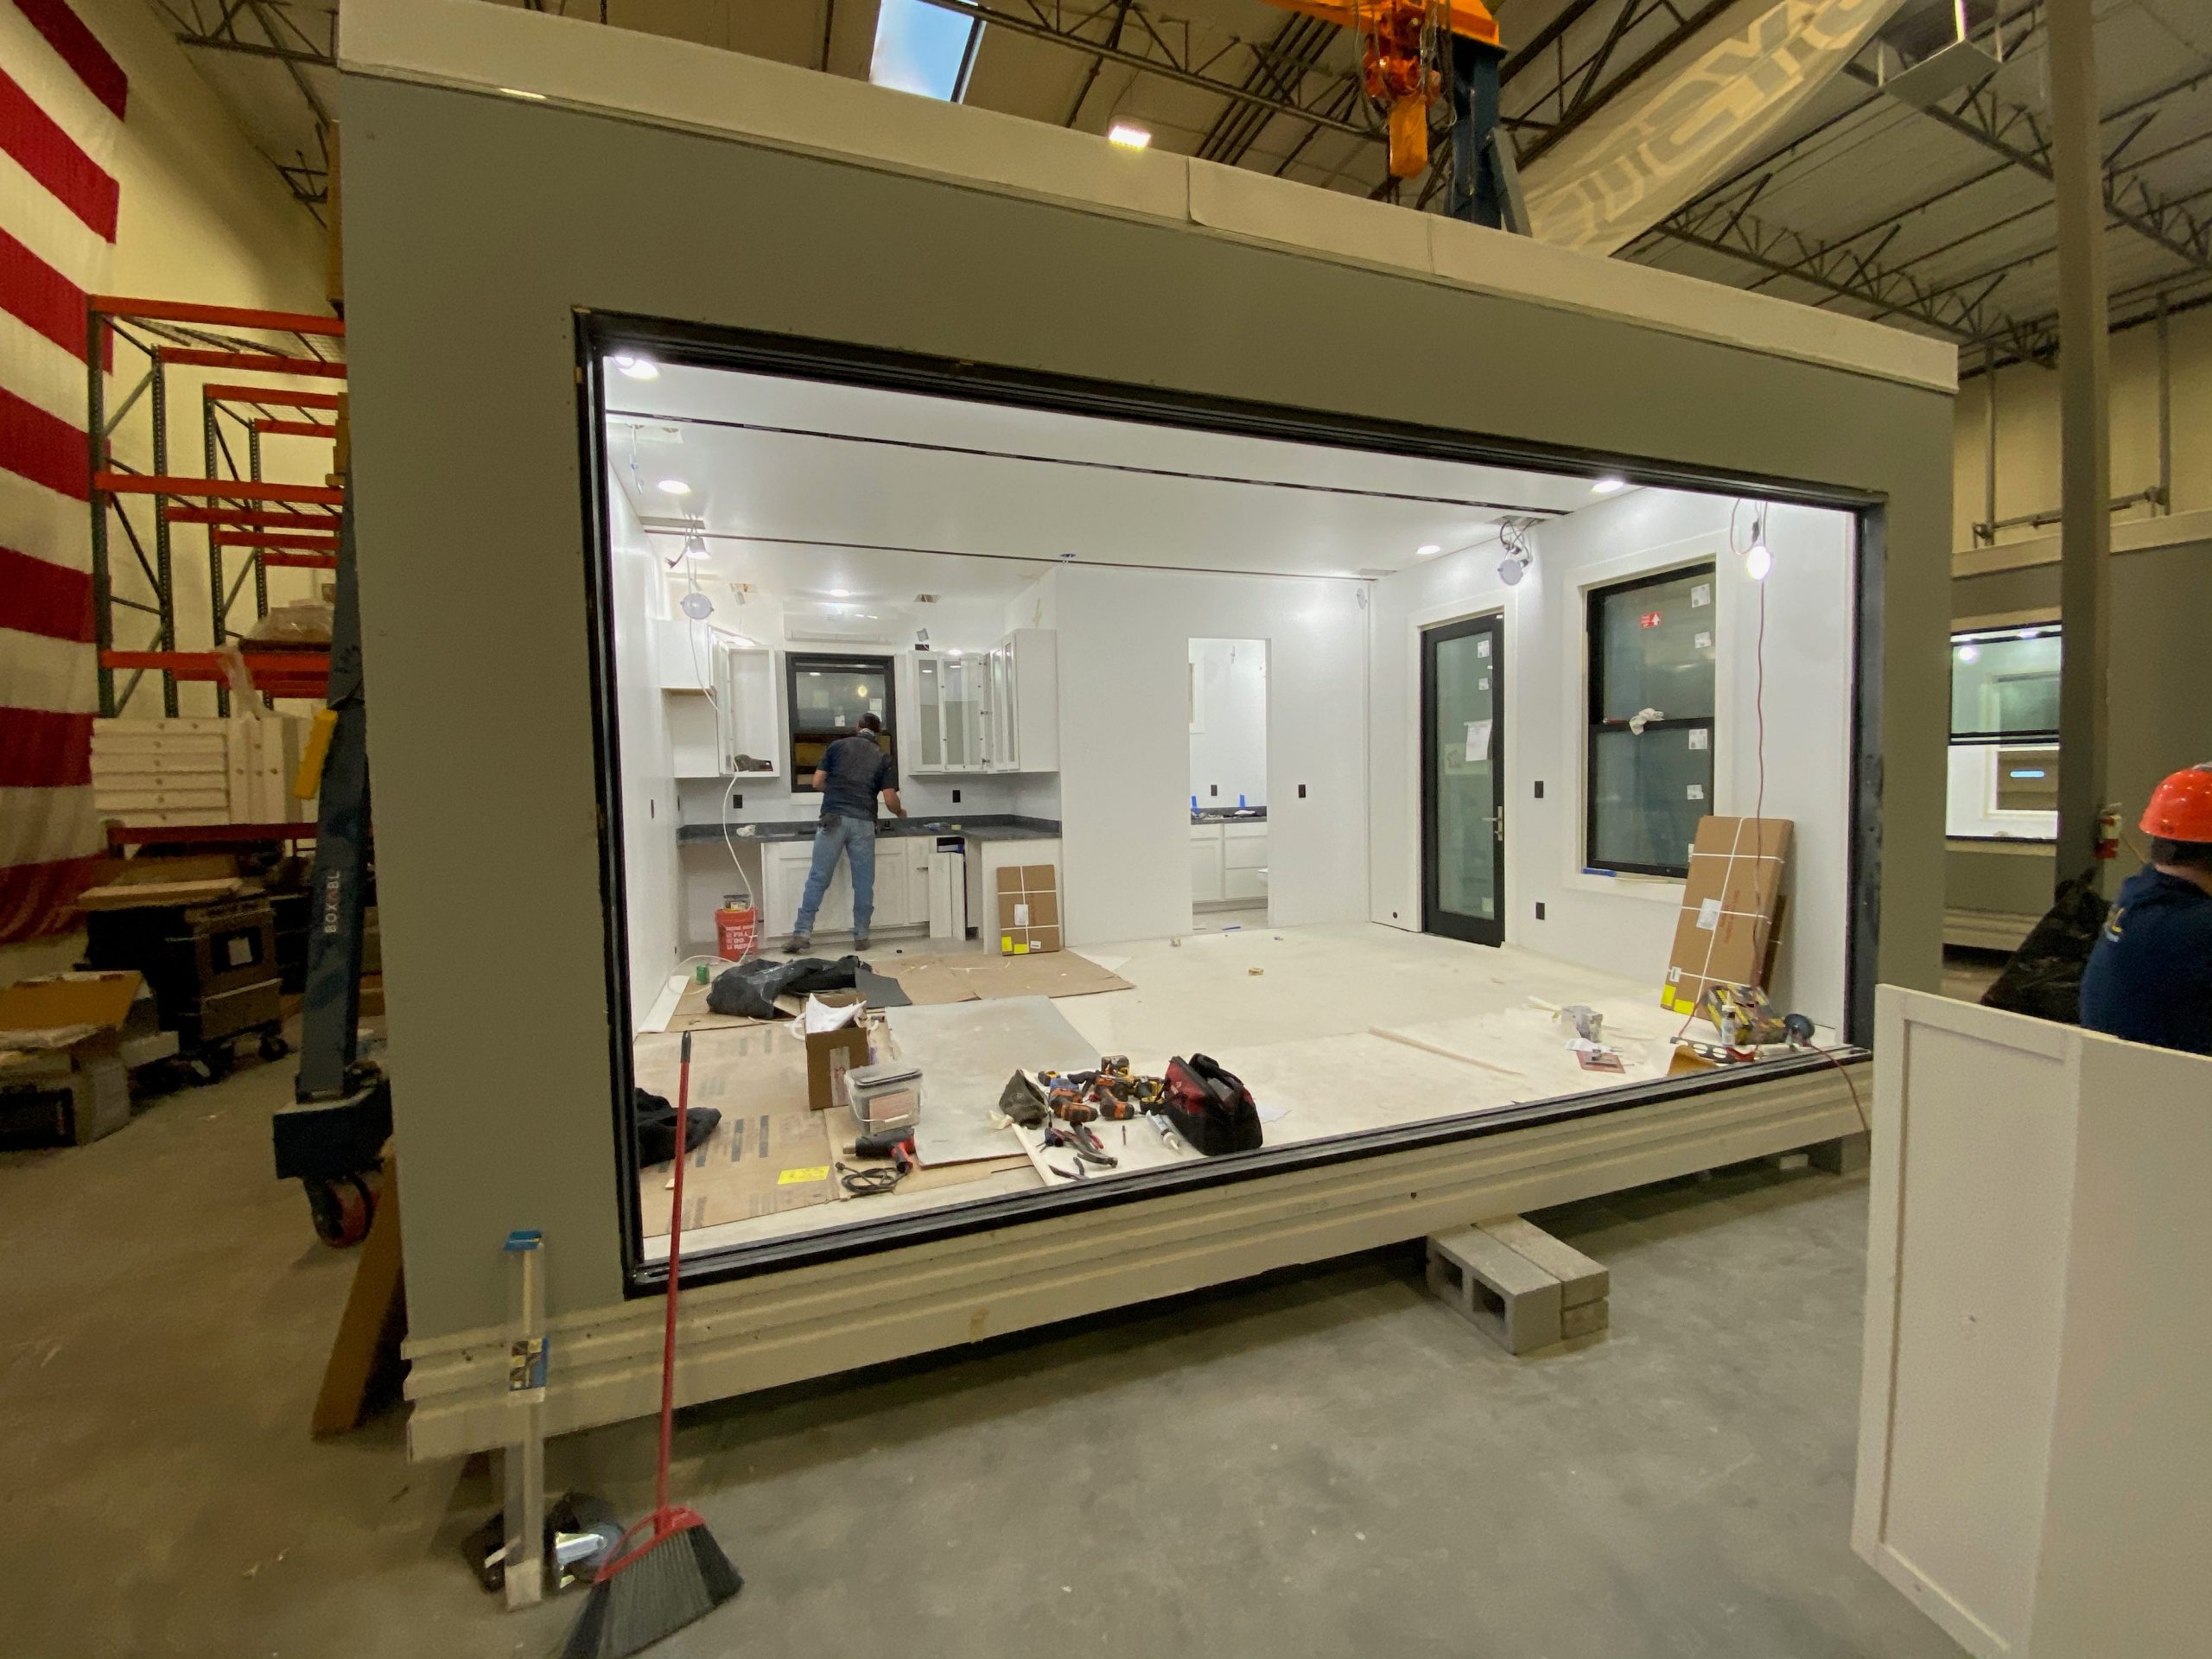 A look inside the Casita as its in a manufacturing space